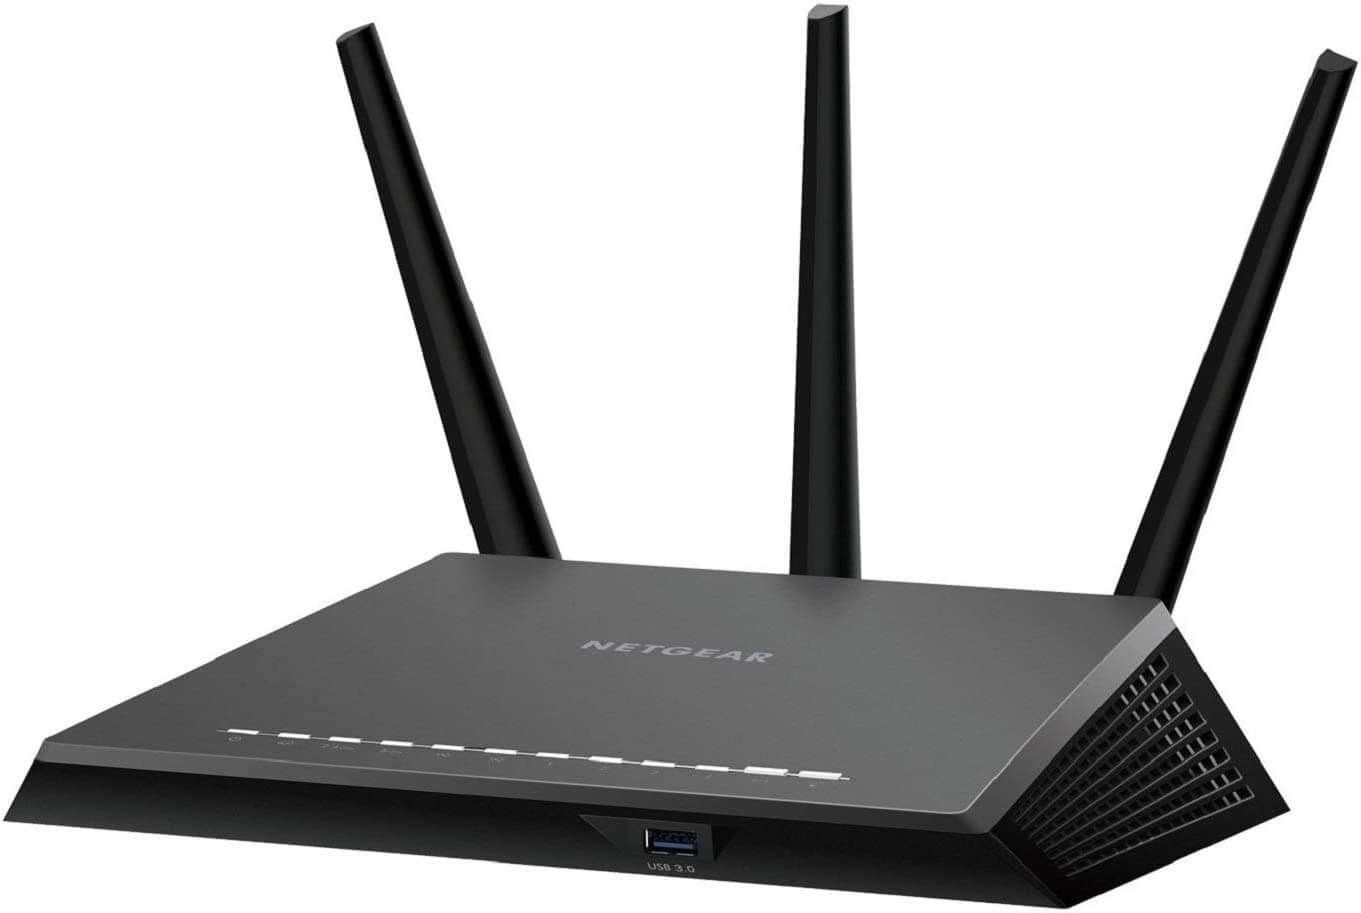 Netgear Nighthawk Smart Wi-Fi Router (R7000) up to 1900 Mbps (NEW IN PACKAGE)